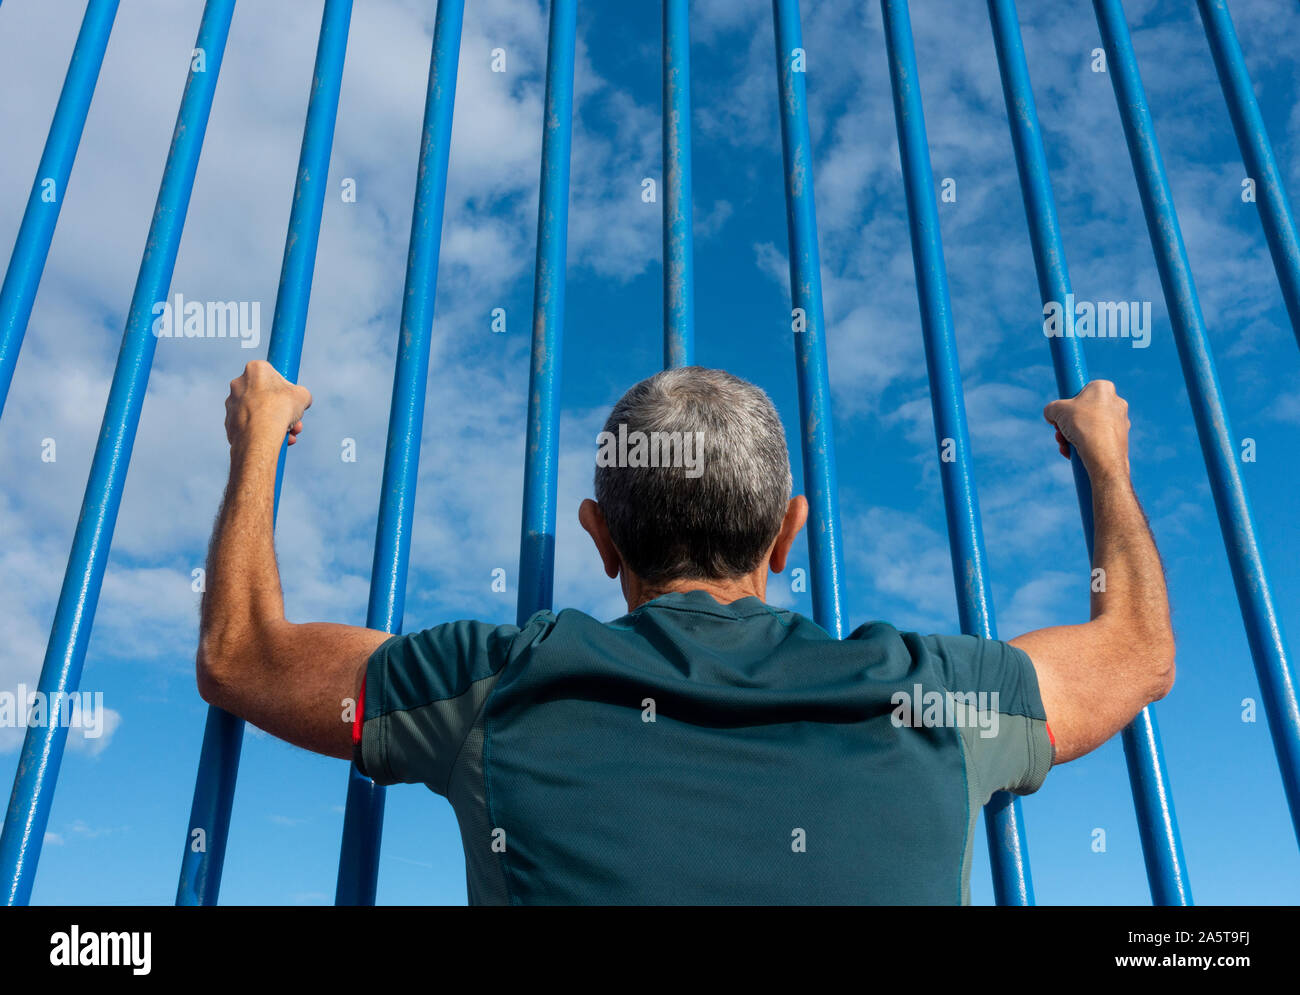 Rear, low angle view of man looking through steel bars. Depression, mental health, prison, asylum seeker, immigration... concept image. Stock Photo